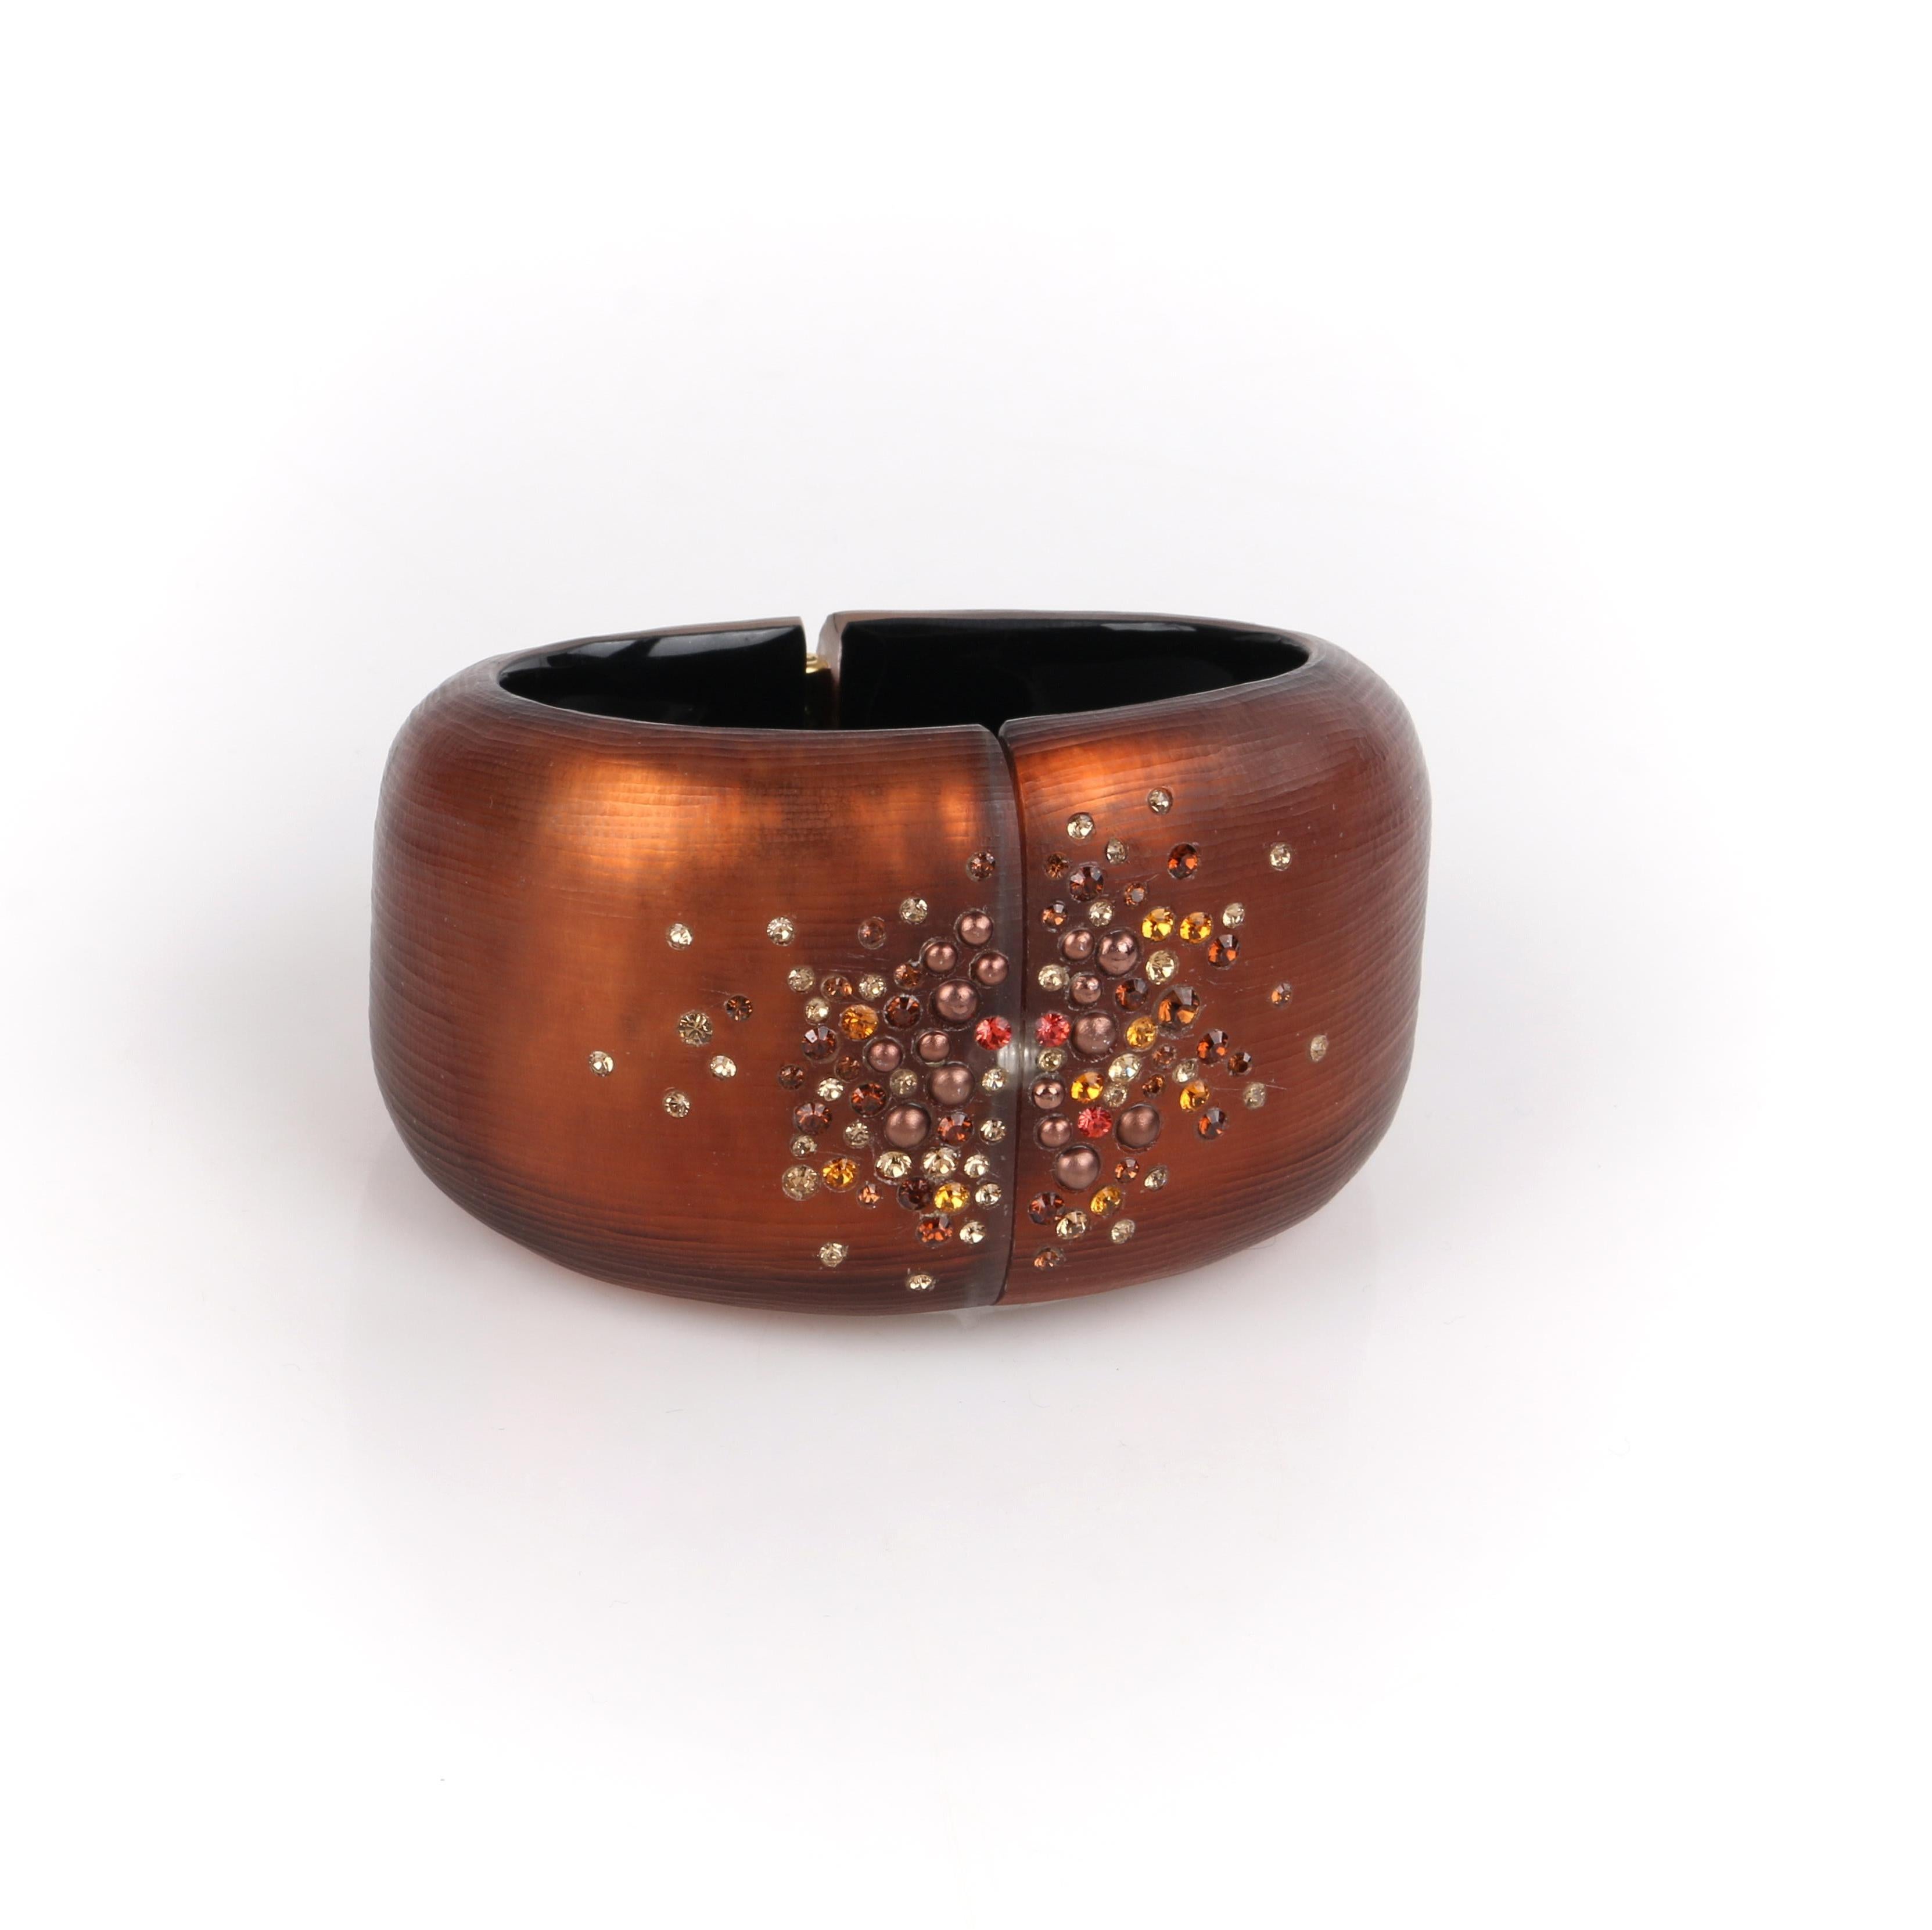 ALEXIS BITTAR Brown Plated 10K Gold Crystal Lucite Clamper Statement Bracelet 

Brand / Manufacturer: Alexis Bittar 
Style: Bangle, bracelet
Color(s): Shades of brown, orange, red, black and gold. 
Unmarked Material: Lucite and 10K gold. 
Additional